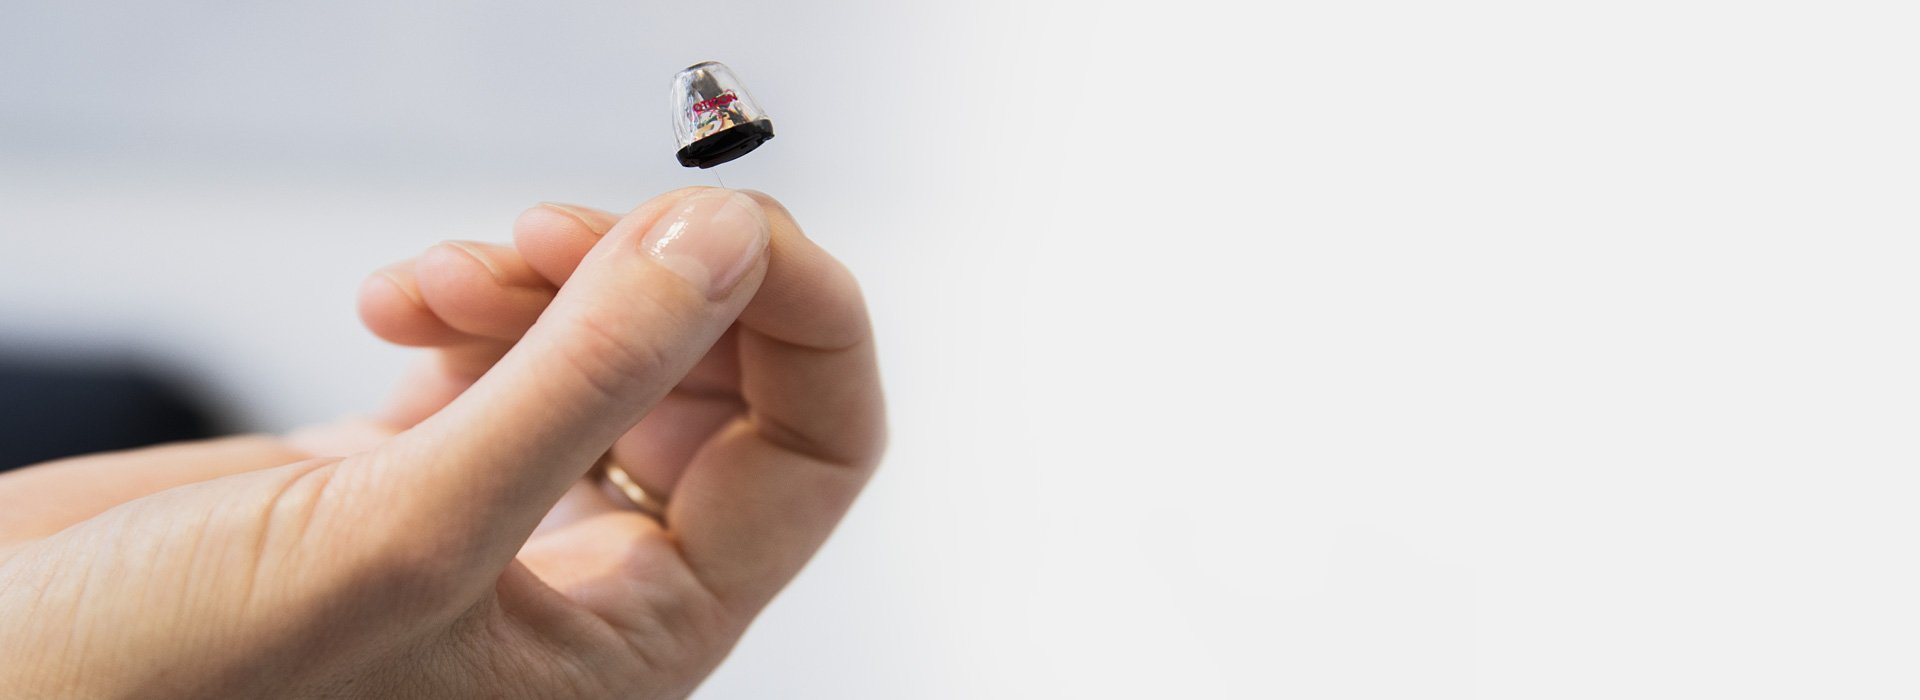 Image shows a hand holding a hearing aid